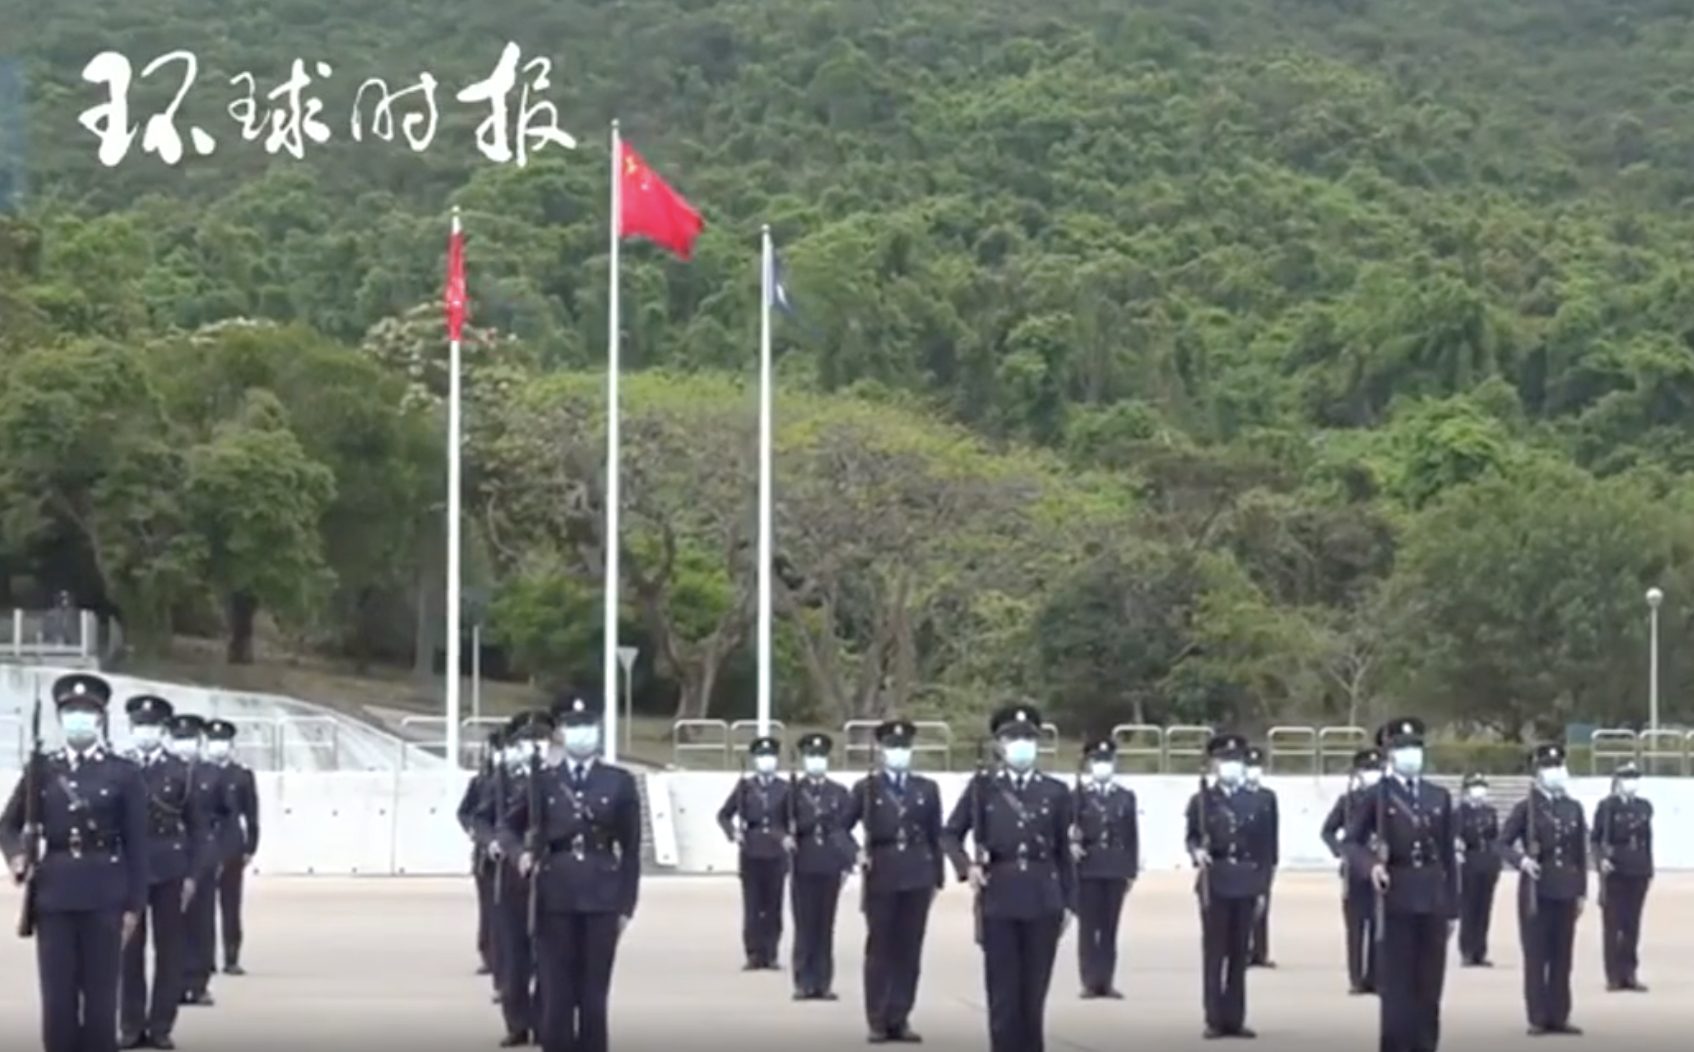 Hong Kong police officially use Chinese footwork to escort the national flag into the stadium!